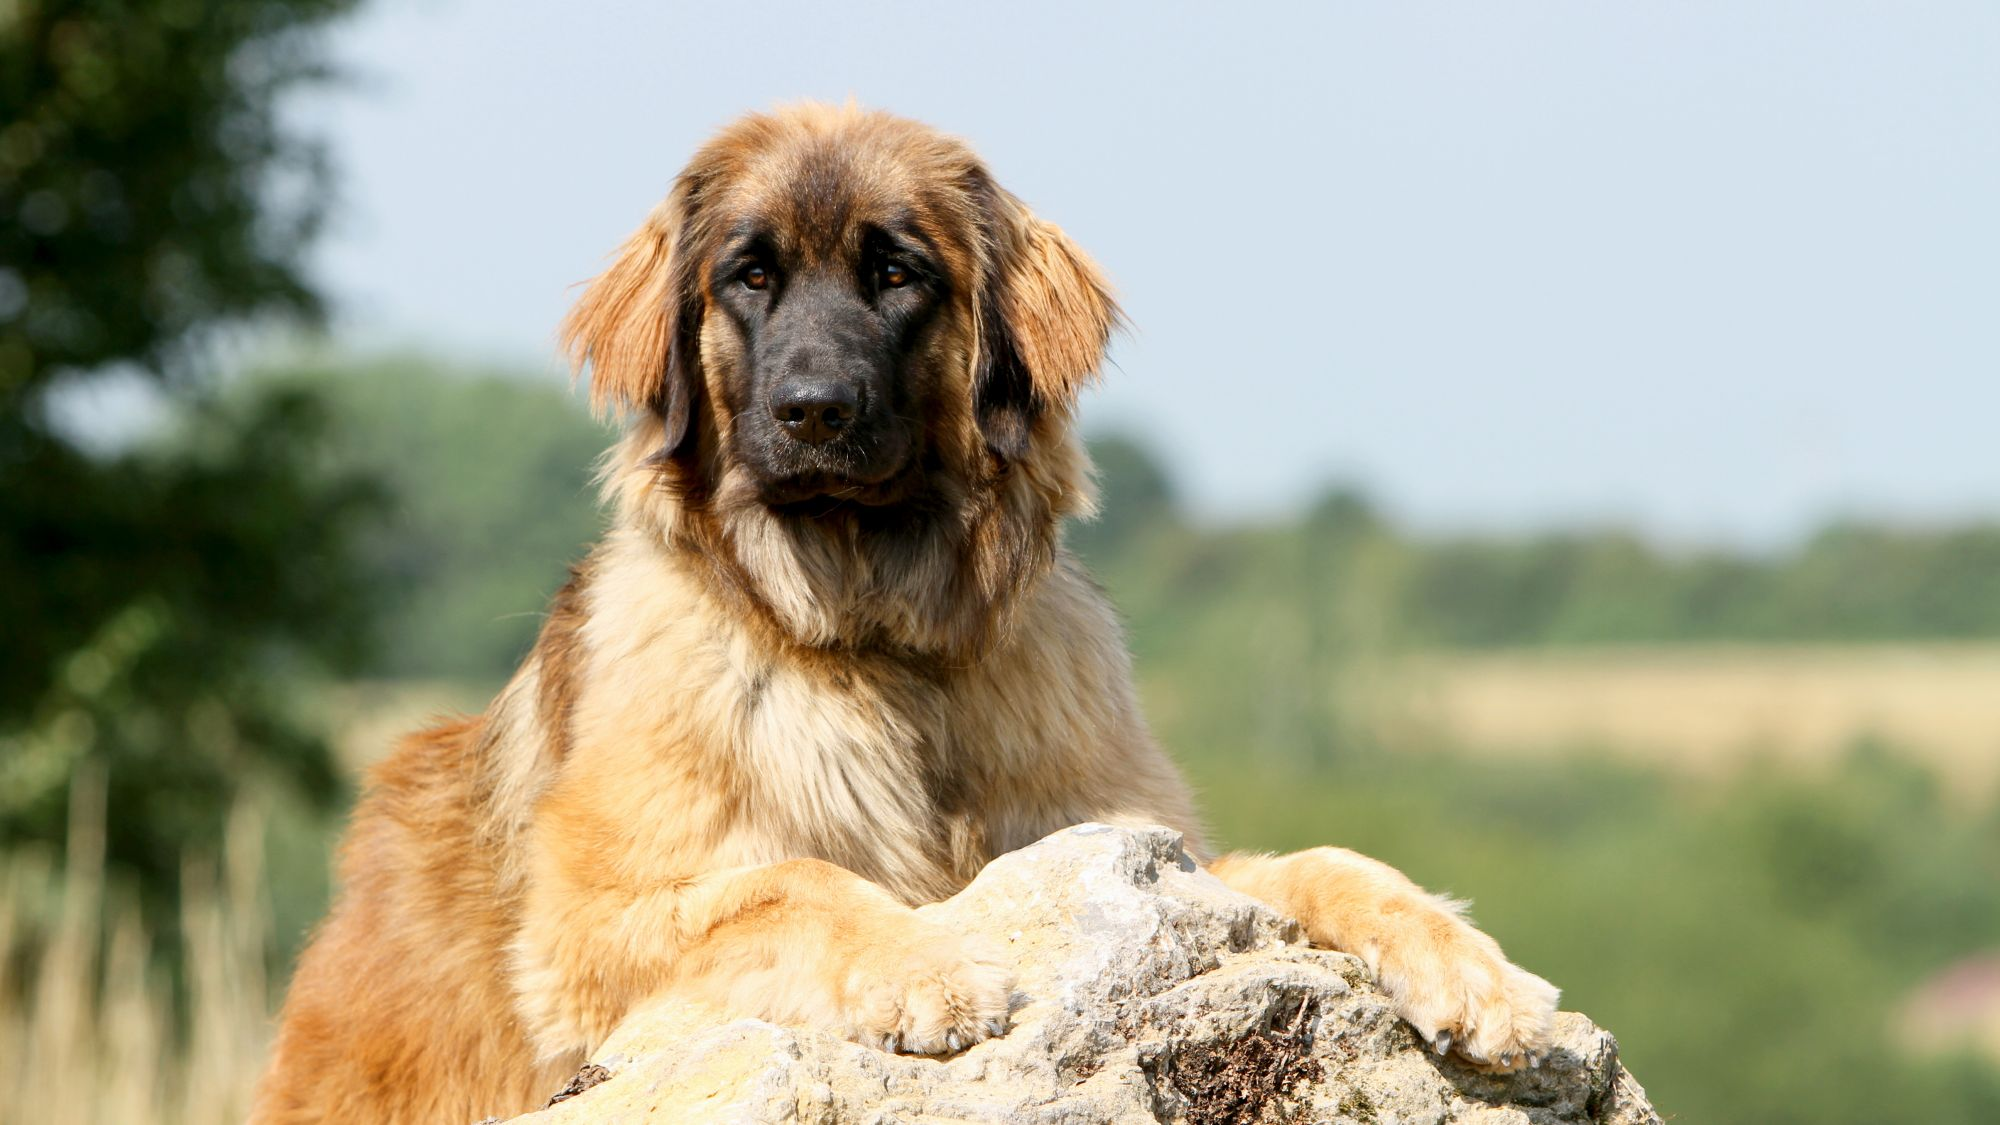 Leonberger lying on rocky outcrop